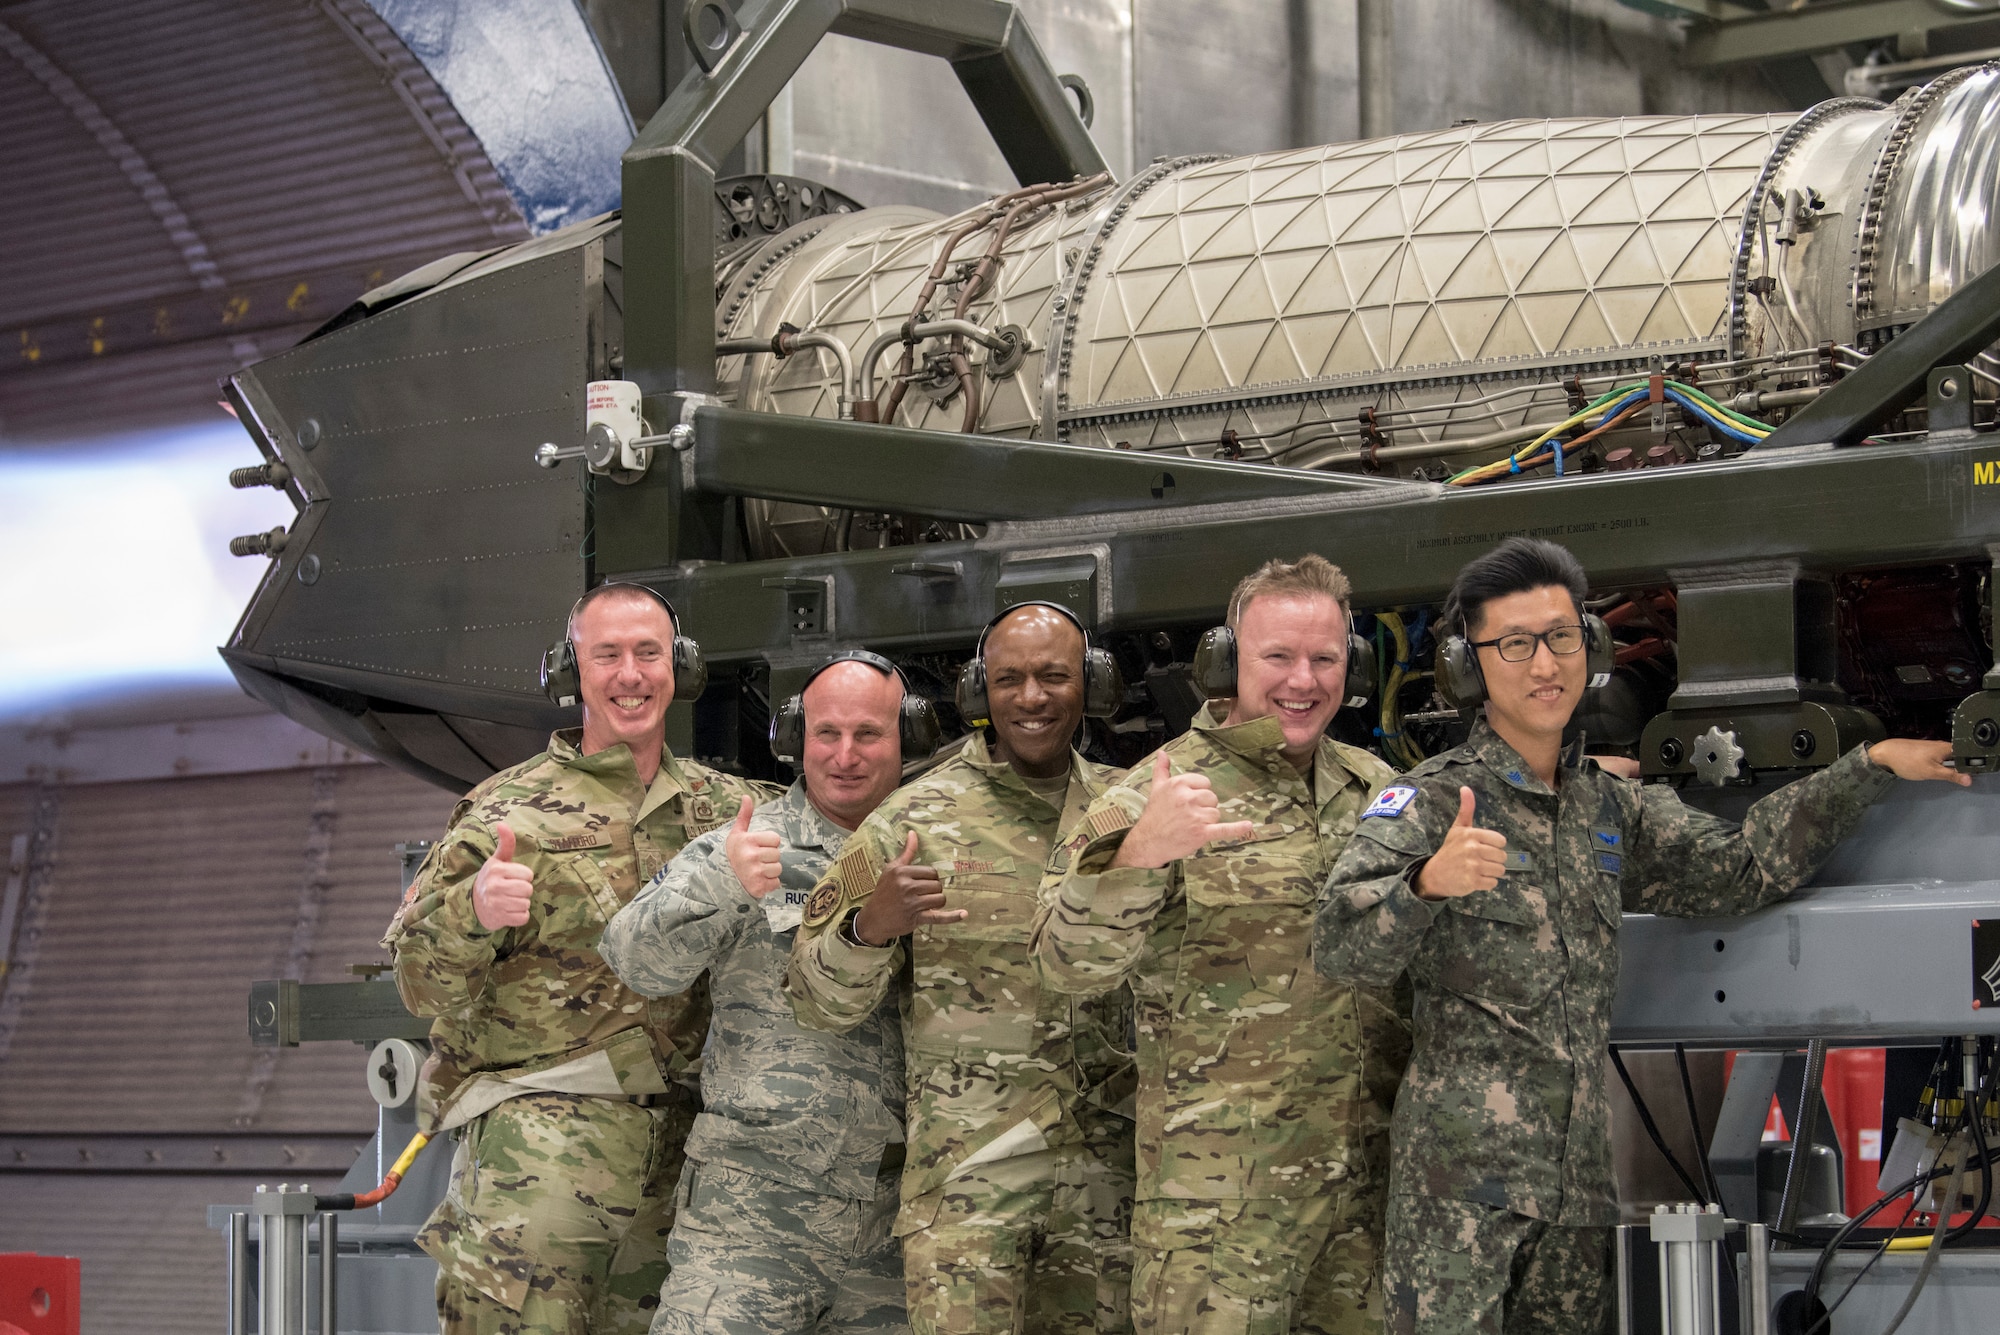 Chief Master Sergeant of the Air Force Kaleth O. Wright, chief master sergeant of the Republic of Korea Young Chan Ra and Joint Base Elmendorf-Richardson senior enlisted leaders pose for a photo during an F-22 jet engine test cell function check at JBER, Alaska, June 10, 2019. Chief Wright visited JBER during Red Flag-Alaska 19-2 to meet with his senior enlisted leader counterparts from throughout the Pacific. Red Flag-Alaska is a Pacific Air Forces-directed exercise that allows U.S. forces to train with coalition partners in a simulated combat environment.